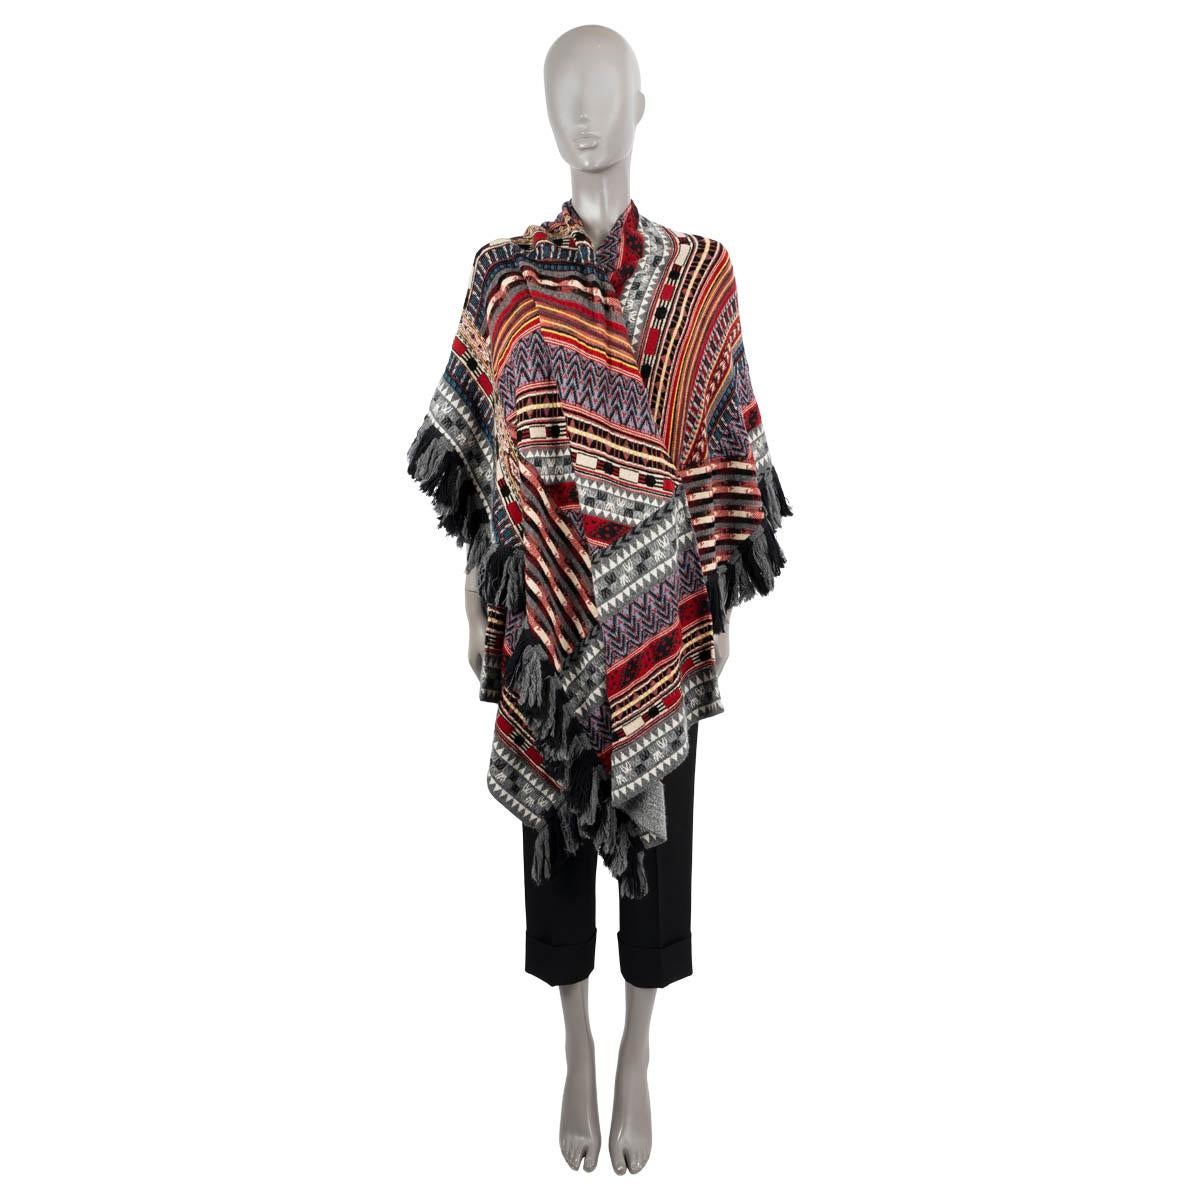 100% authentic Etro striped poncho in burgundy, grey, black, beige, white, purple, yellow and blue wool (86%), viscose (12%) and polyamide (2%) with grey and black fringed hem. Unlined. Has been worn and is in excellent condition. 

Measurements
Tag